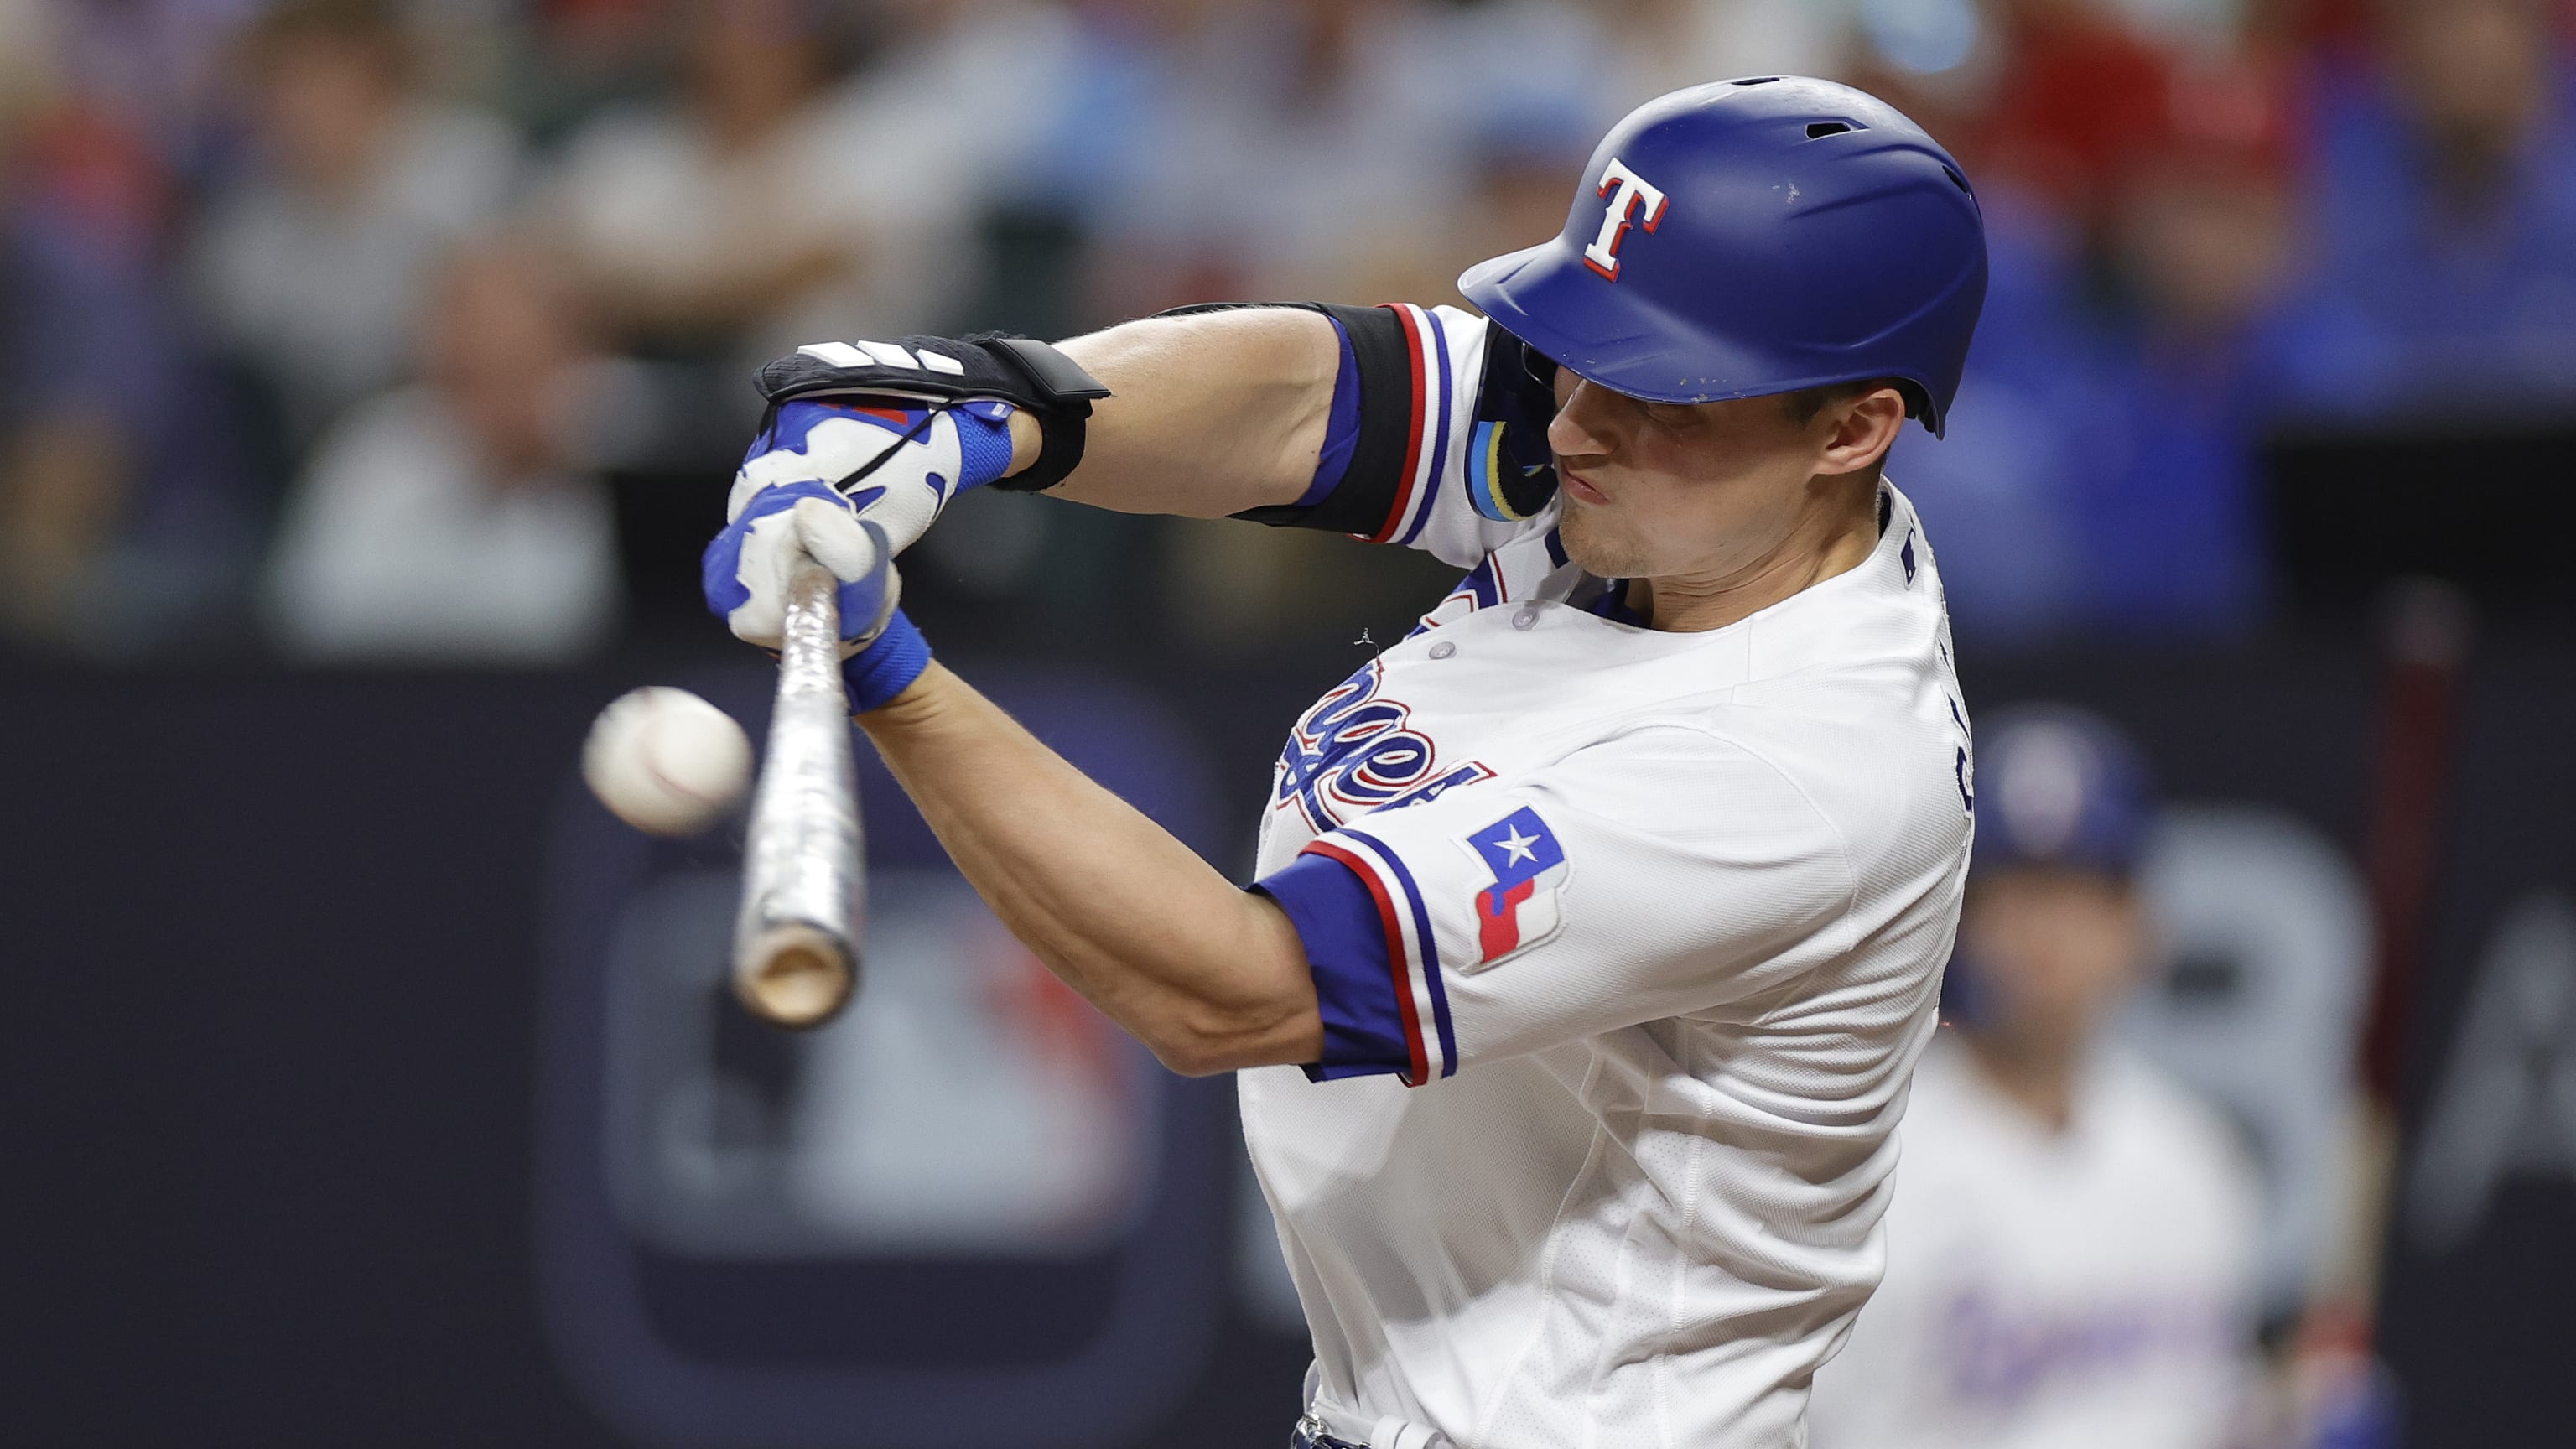 Rangers need Corey Seager, Marcus Semien to break out